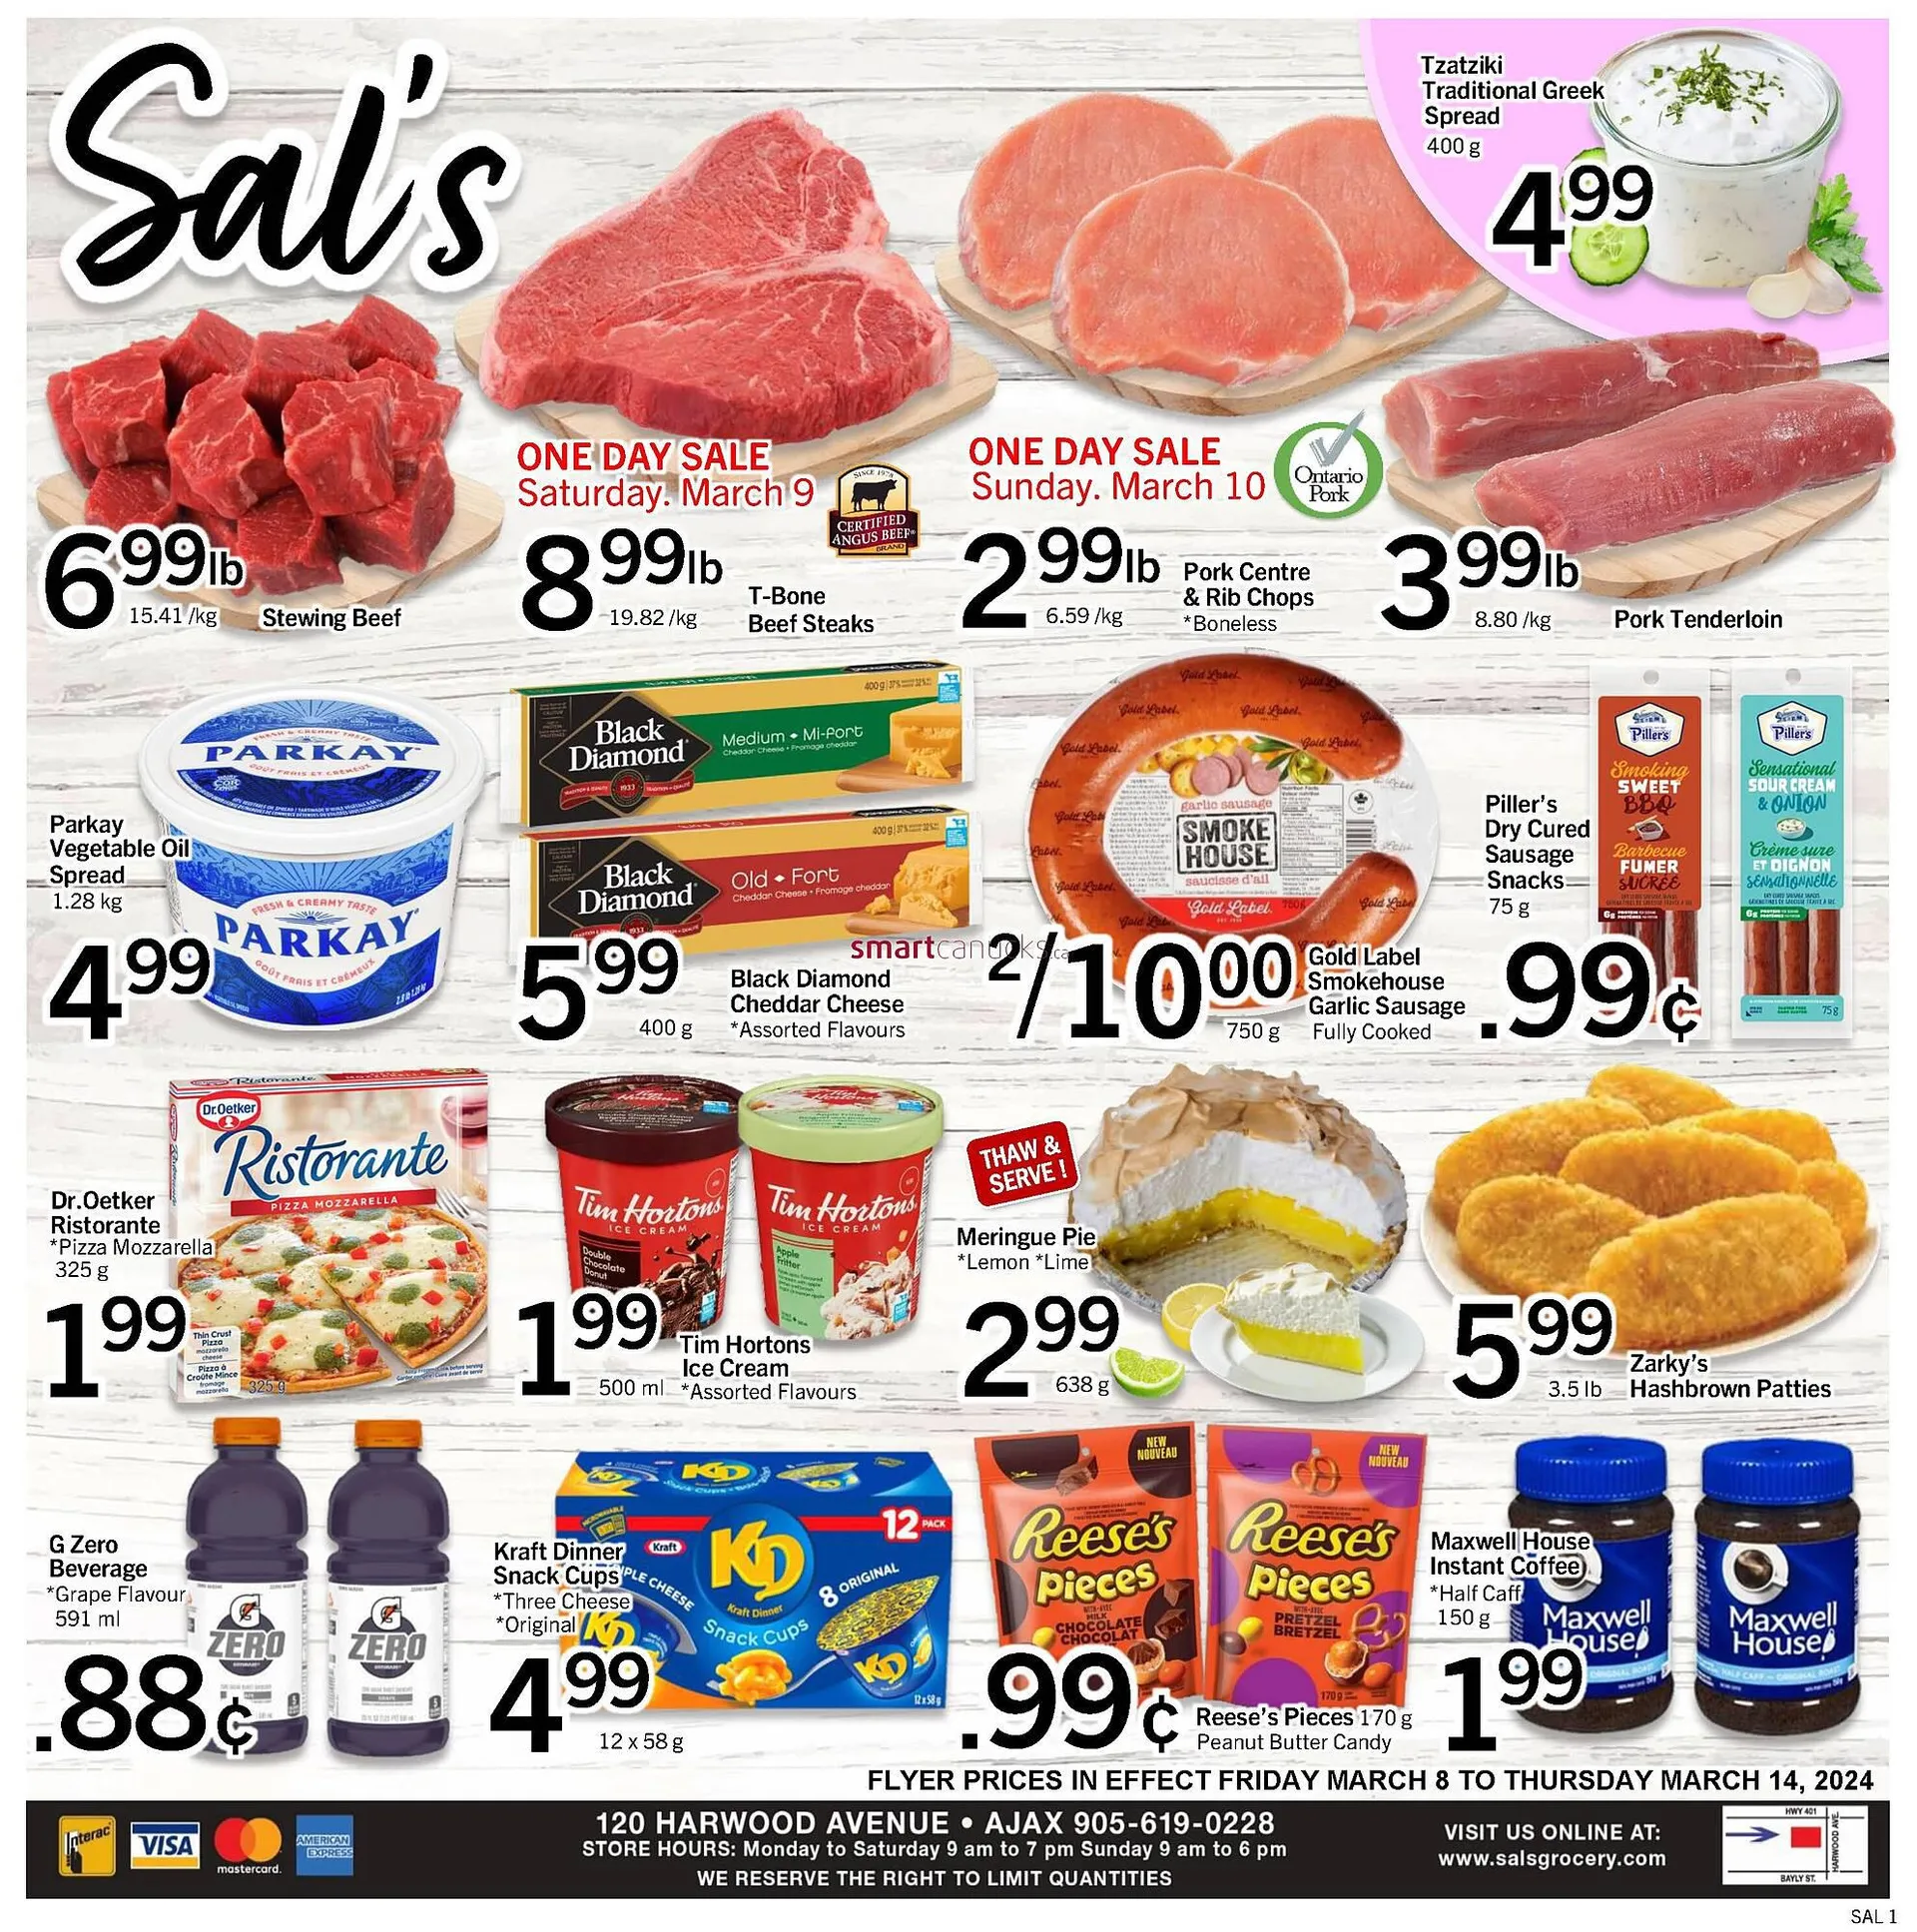 Sal's Grocery flyer from March 8 to March 14 2024 - flyer page 1